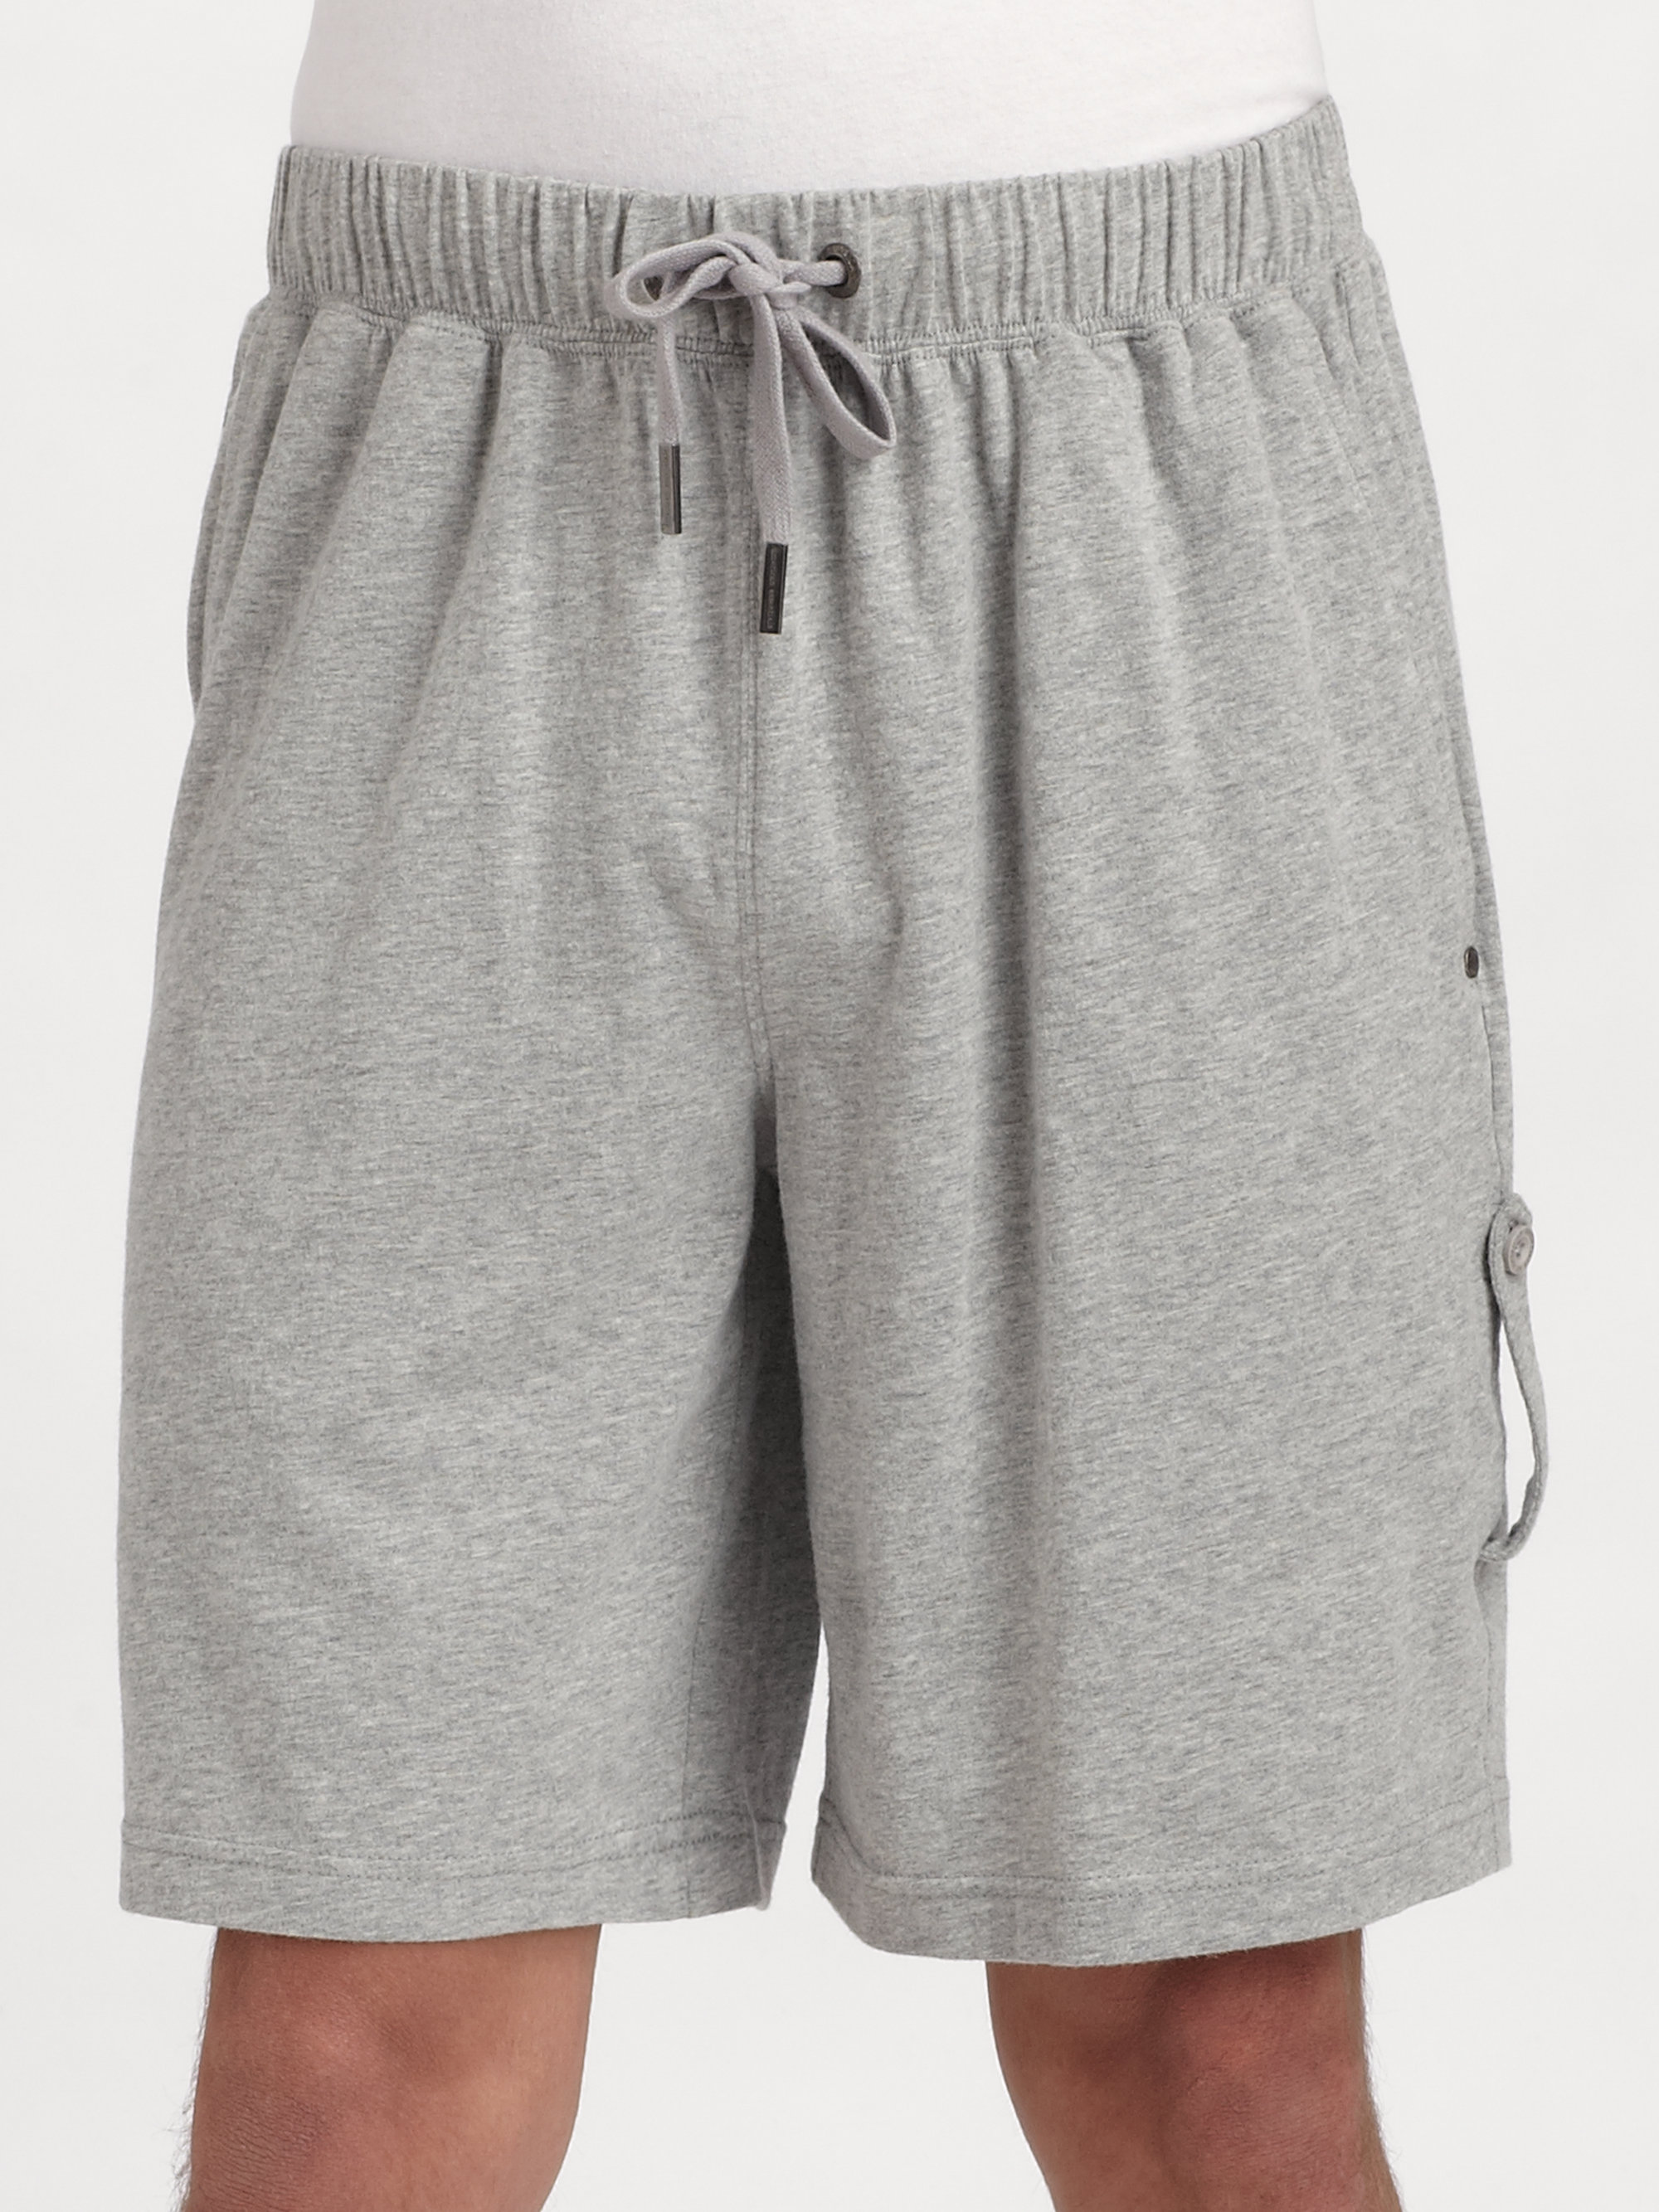 American essentials Organic Cotton Drawstring Shorts in Gray for ...